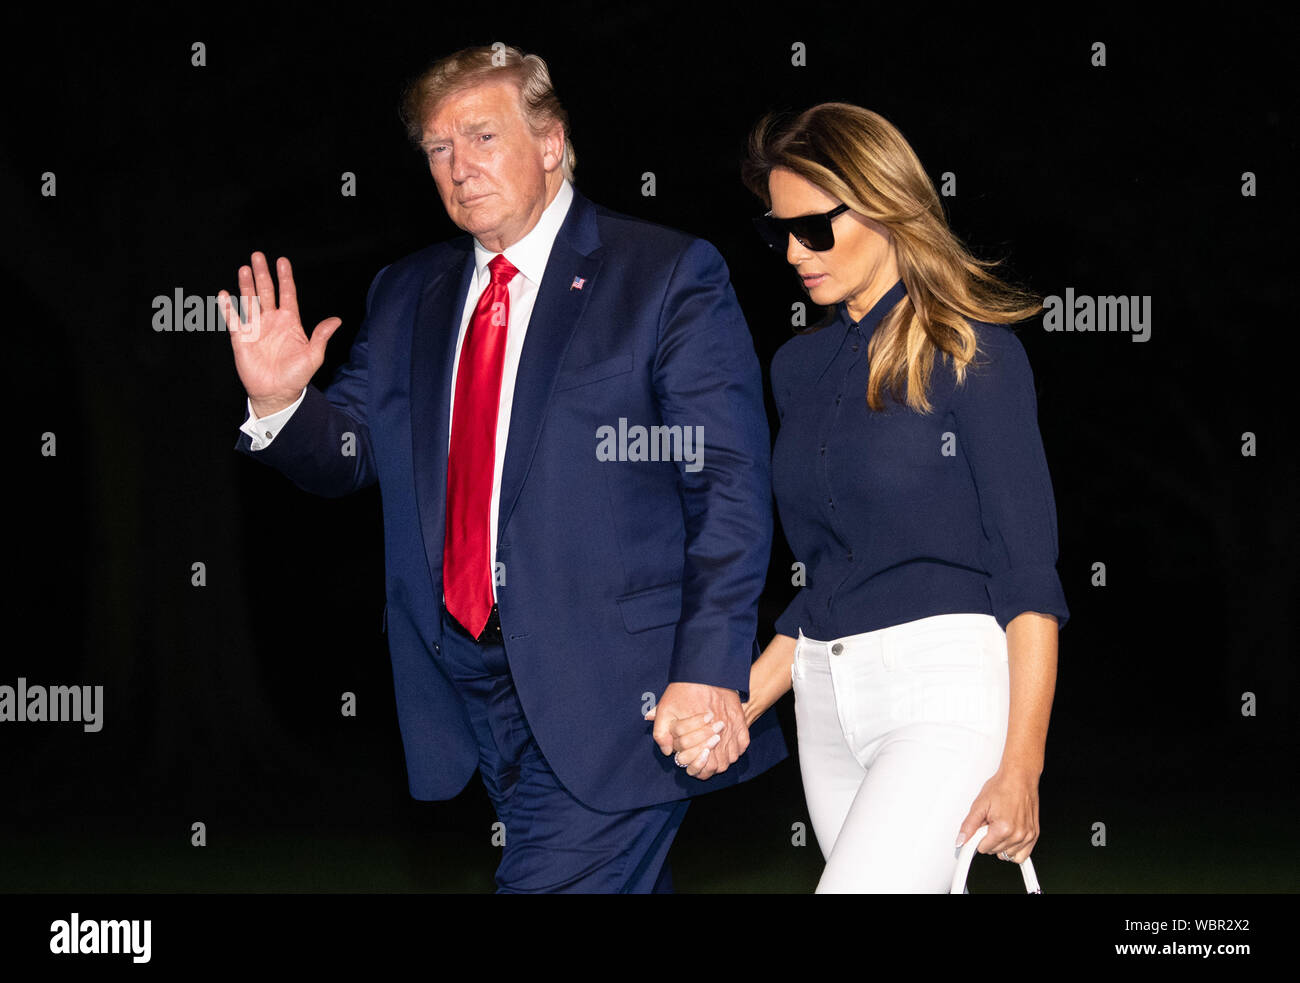 Washington DC, USA. 26th Aug, 2019. United States President DONALD J. TRUMP waves to the press as he and first lady MELANIA TRUMP return to the White House after attending the G7 Summit in France. Credit: Kevin Dietsch/CNP/ZUMA Wire/Alamy Live News Stock Photo